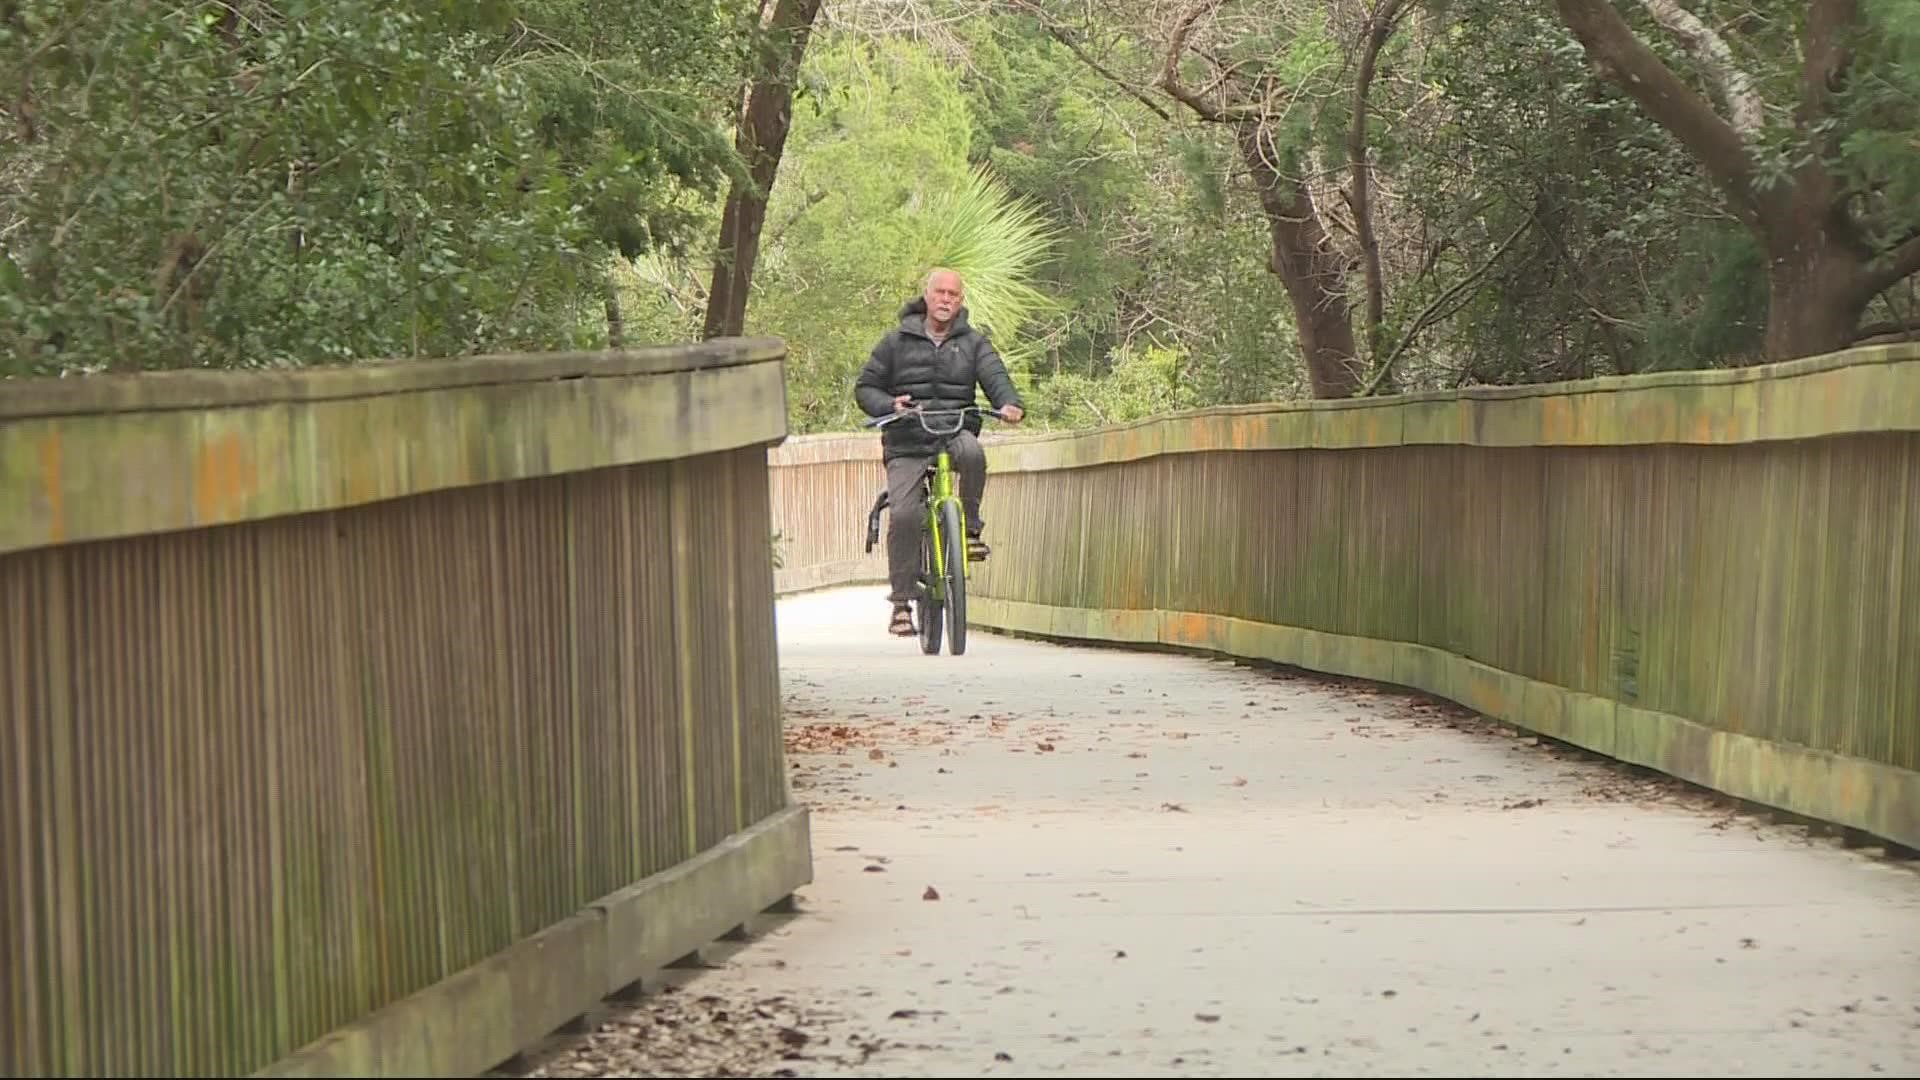 St. Augustine residents are disagreeing over a public boardwalk.